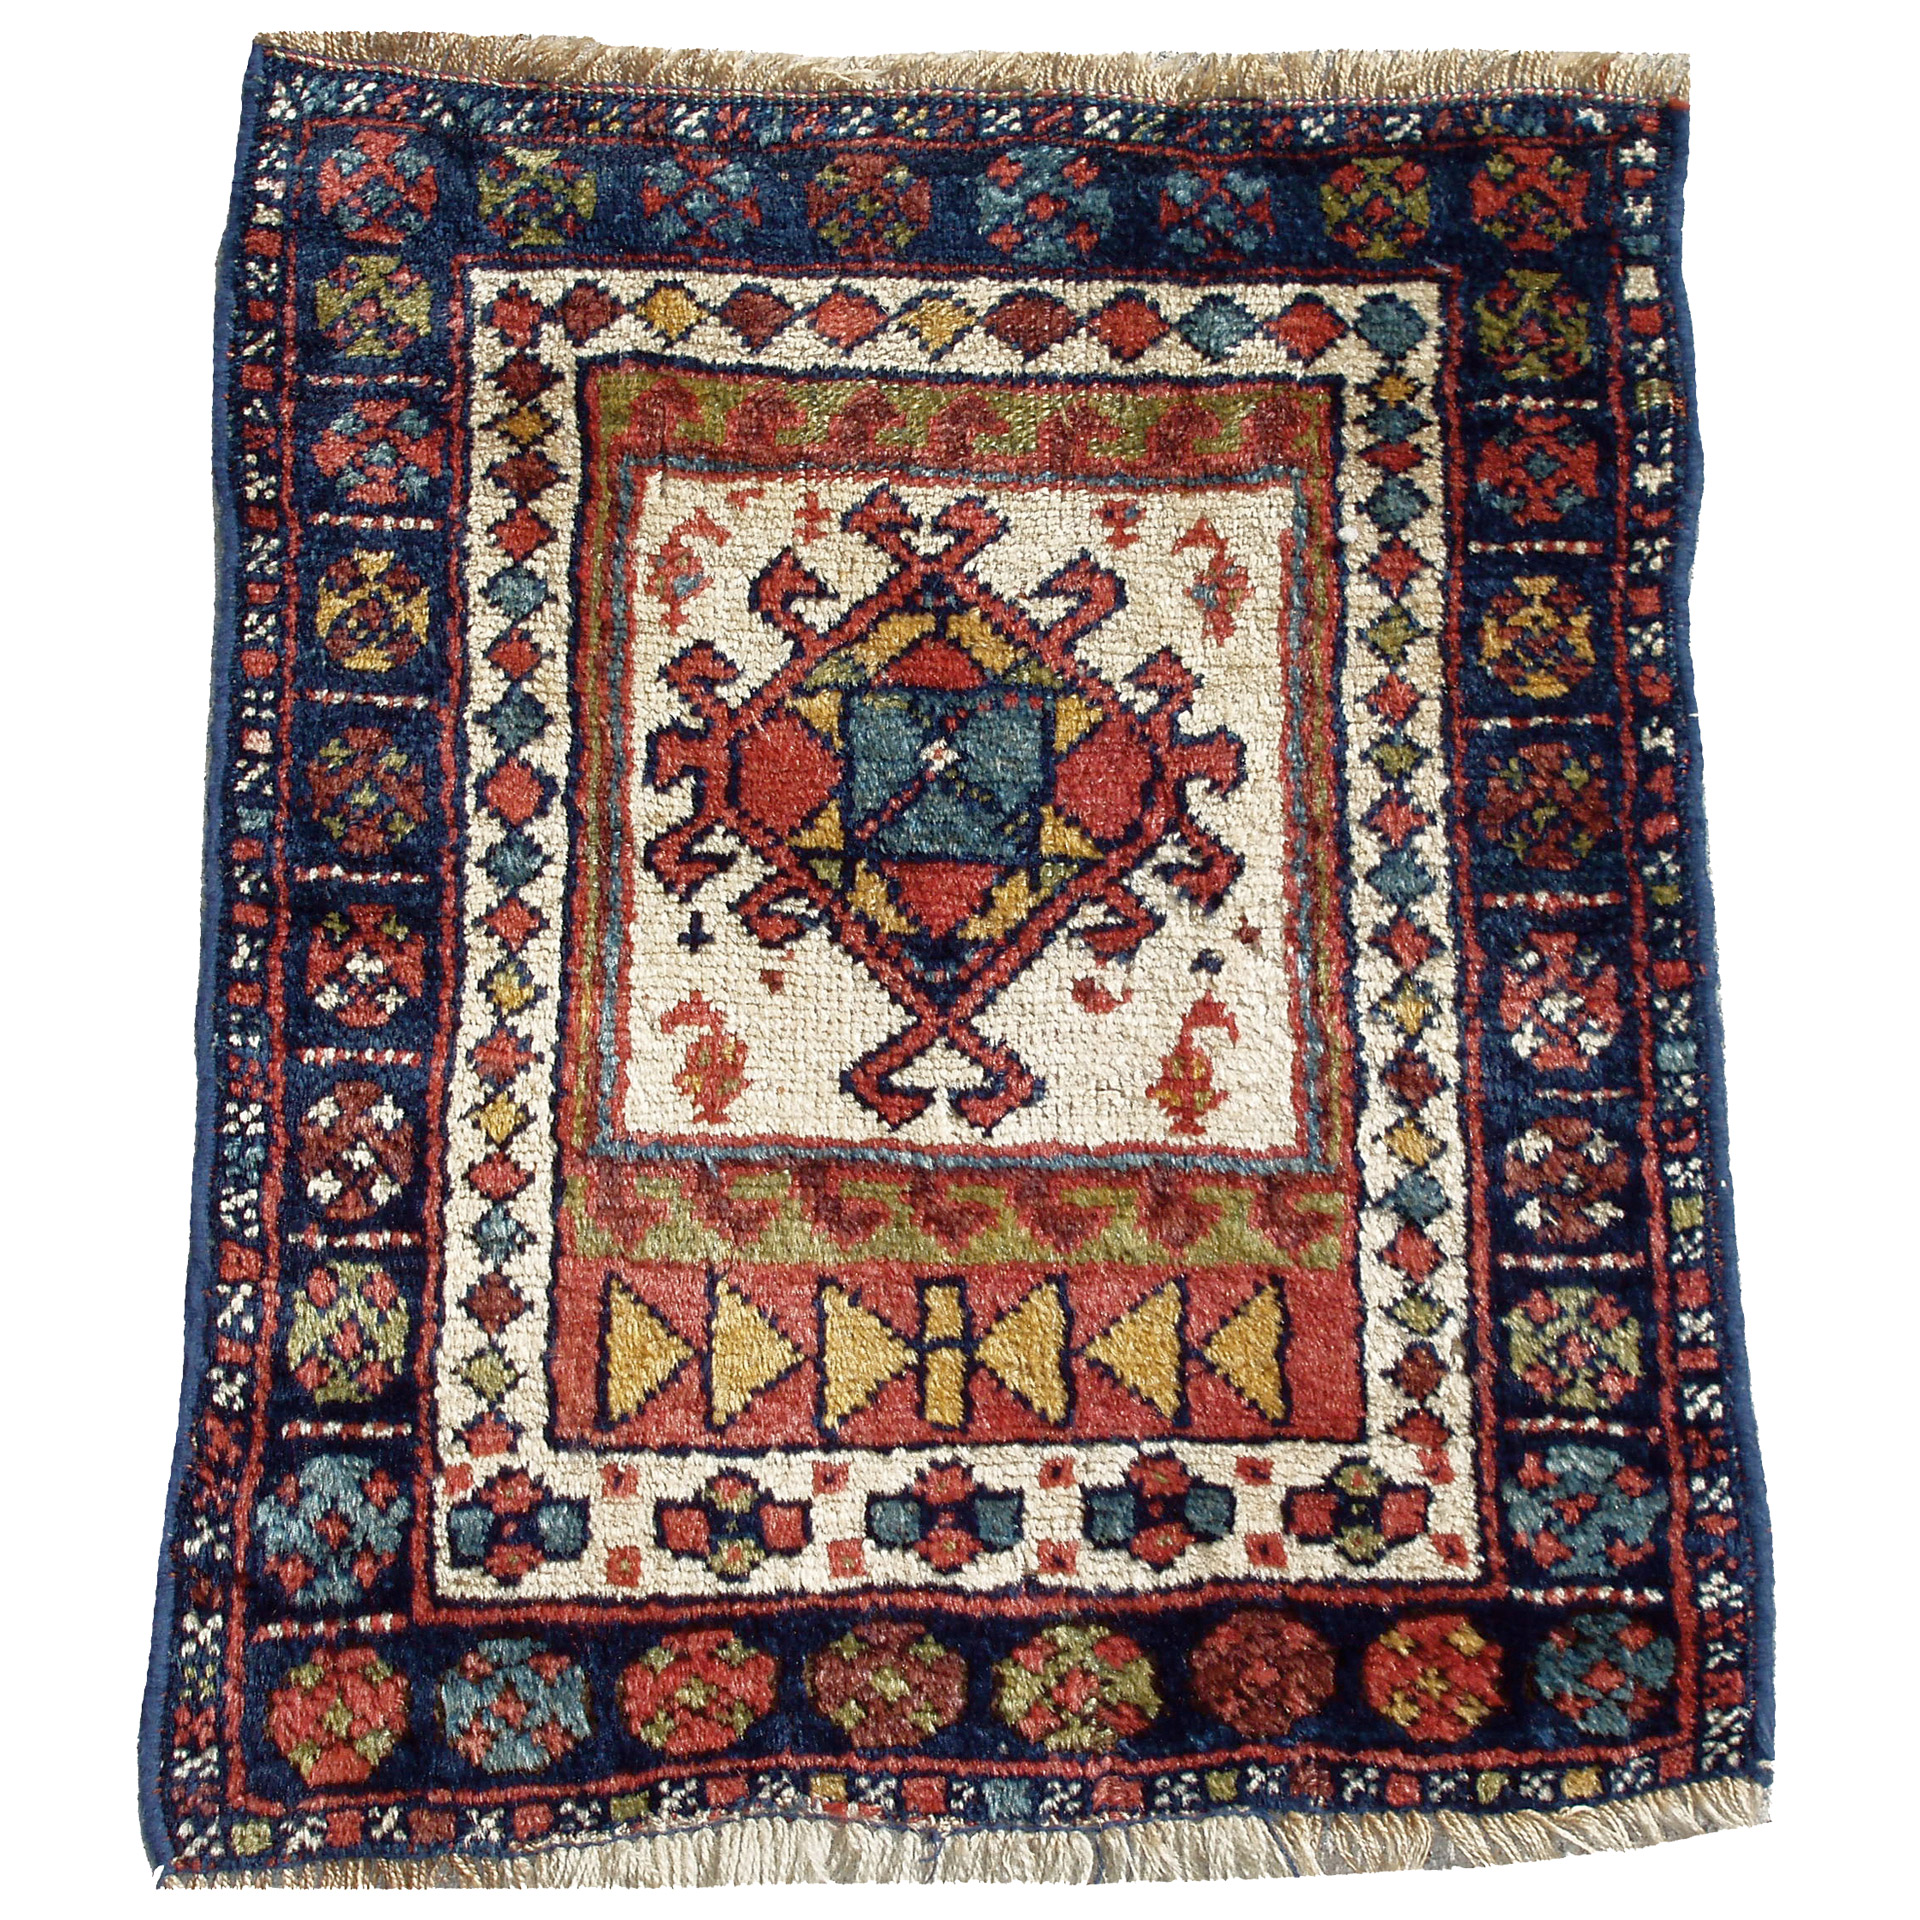 From our Douglas Stock Gallery antique Oriental rug research archives, an antique northwest Persian Kurdish bagface with an ivory field, circa 1900